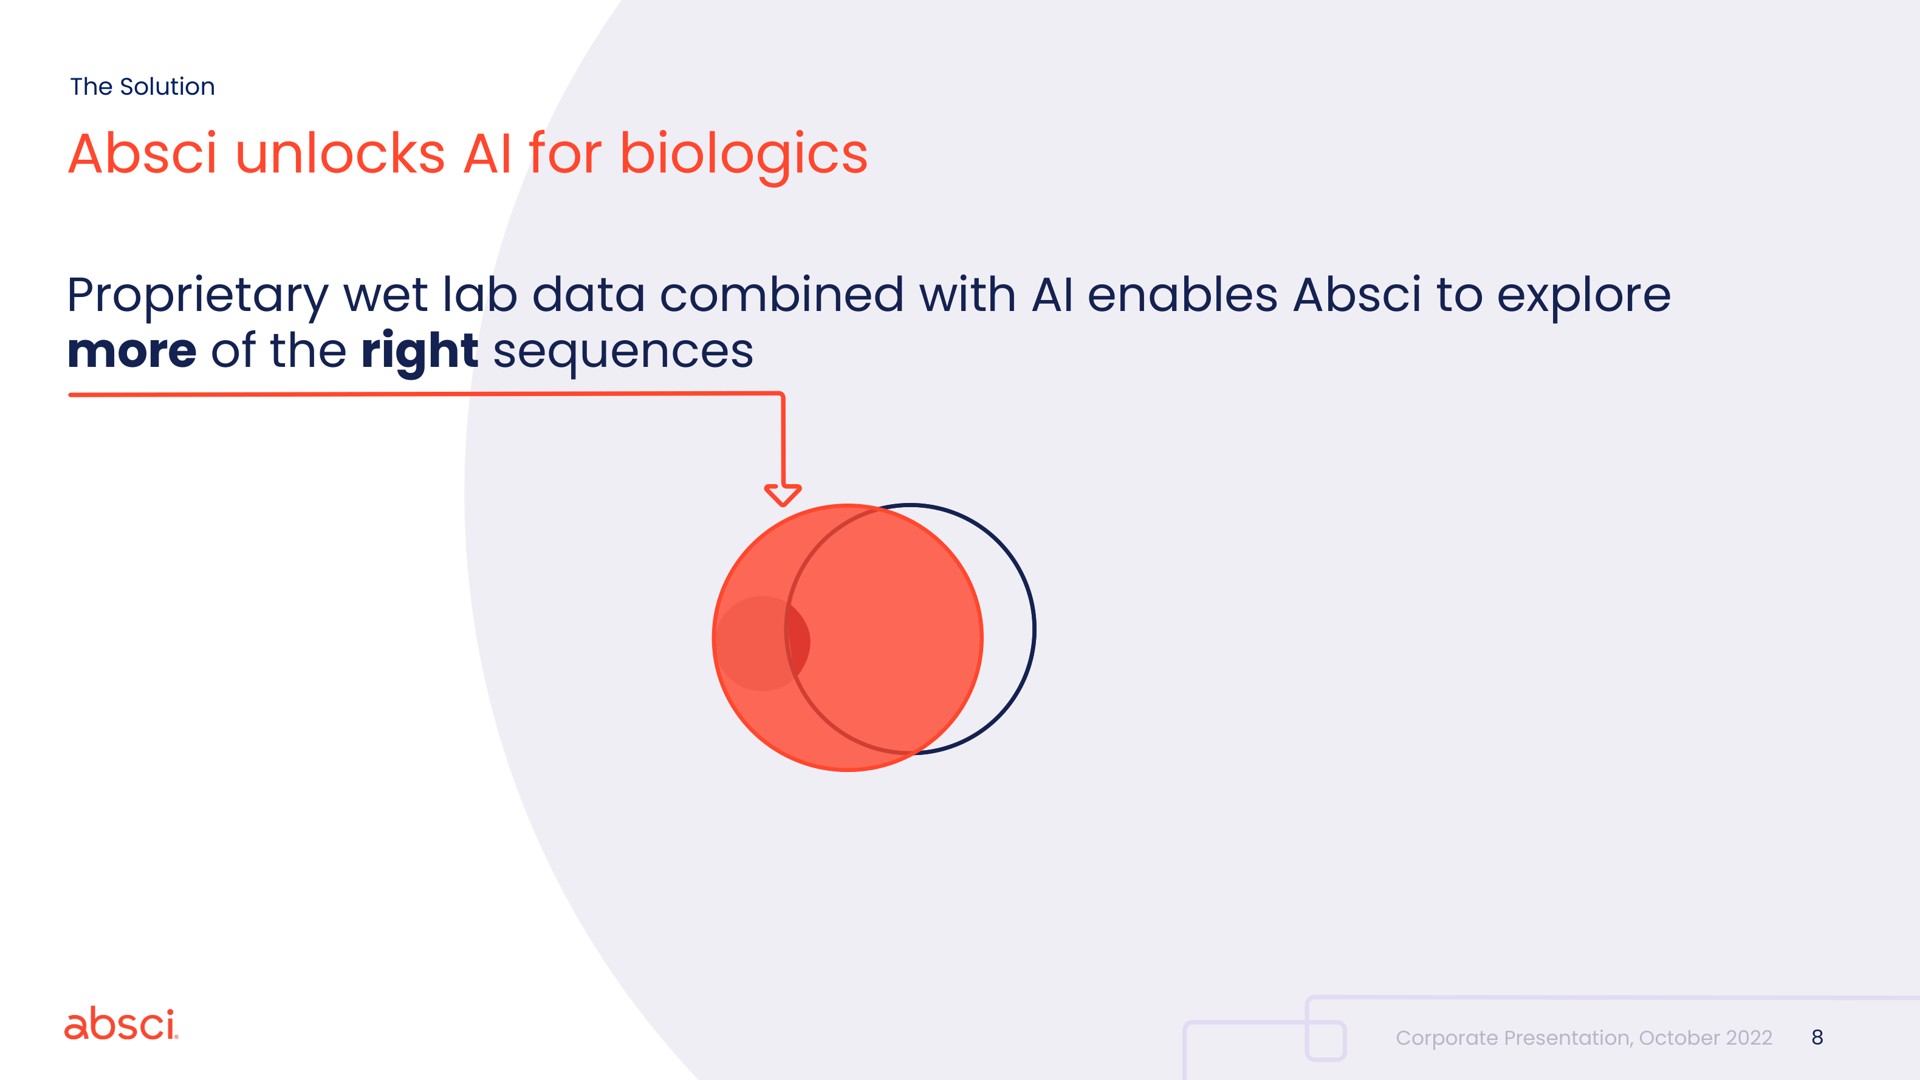 unlocks for proprietary wet lab data combined with enables to explore more of the right sequences | Absci